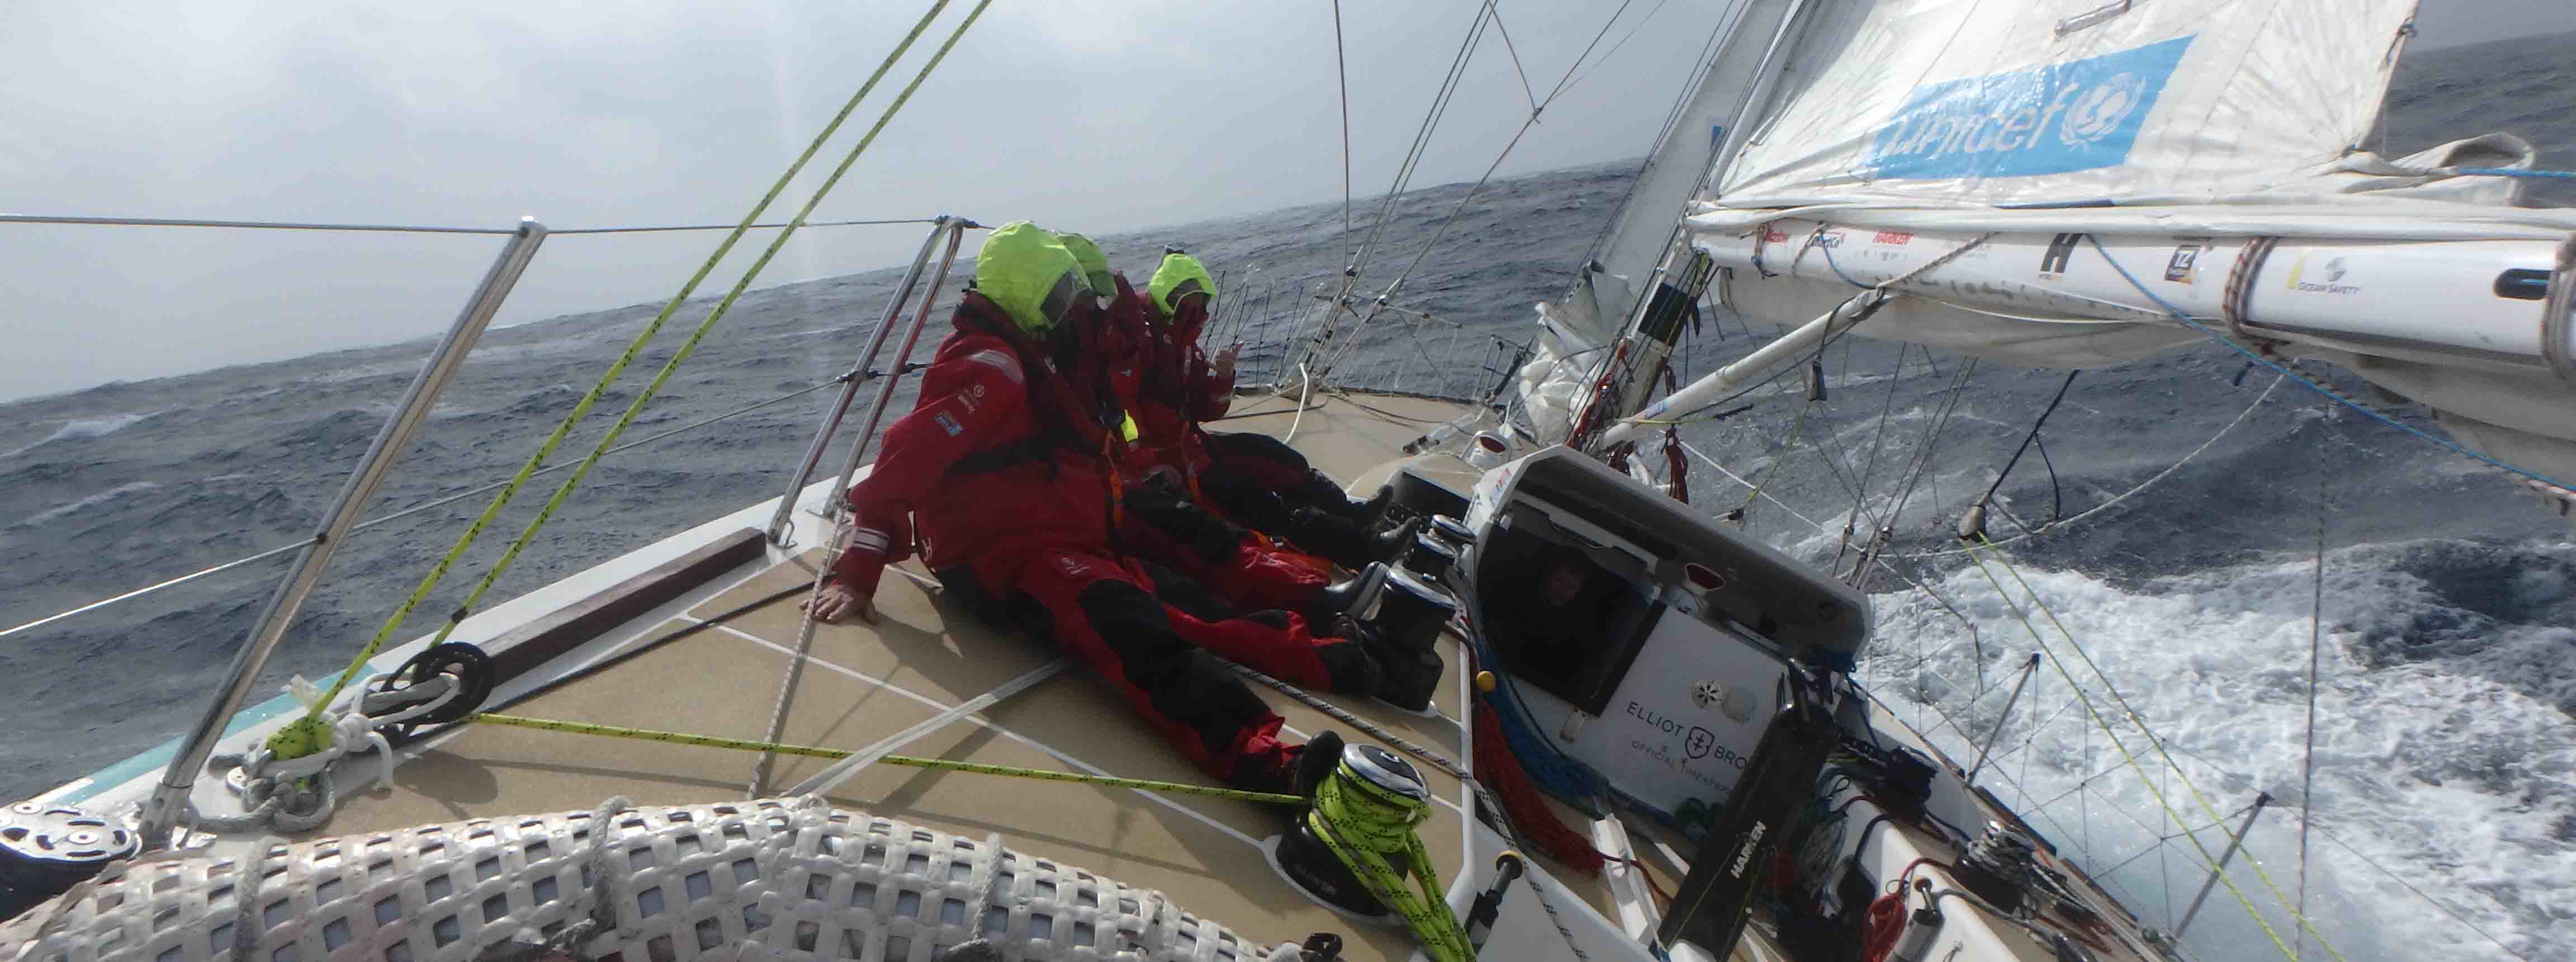 ​Race 8 Day 12 Icy conditions as remaining teams beat upwind to Qingdao Race Finish